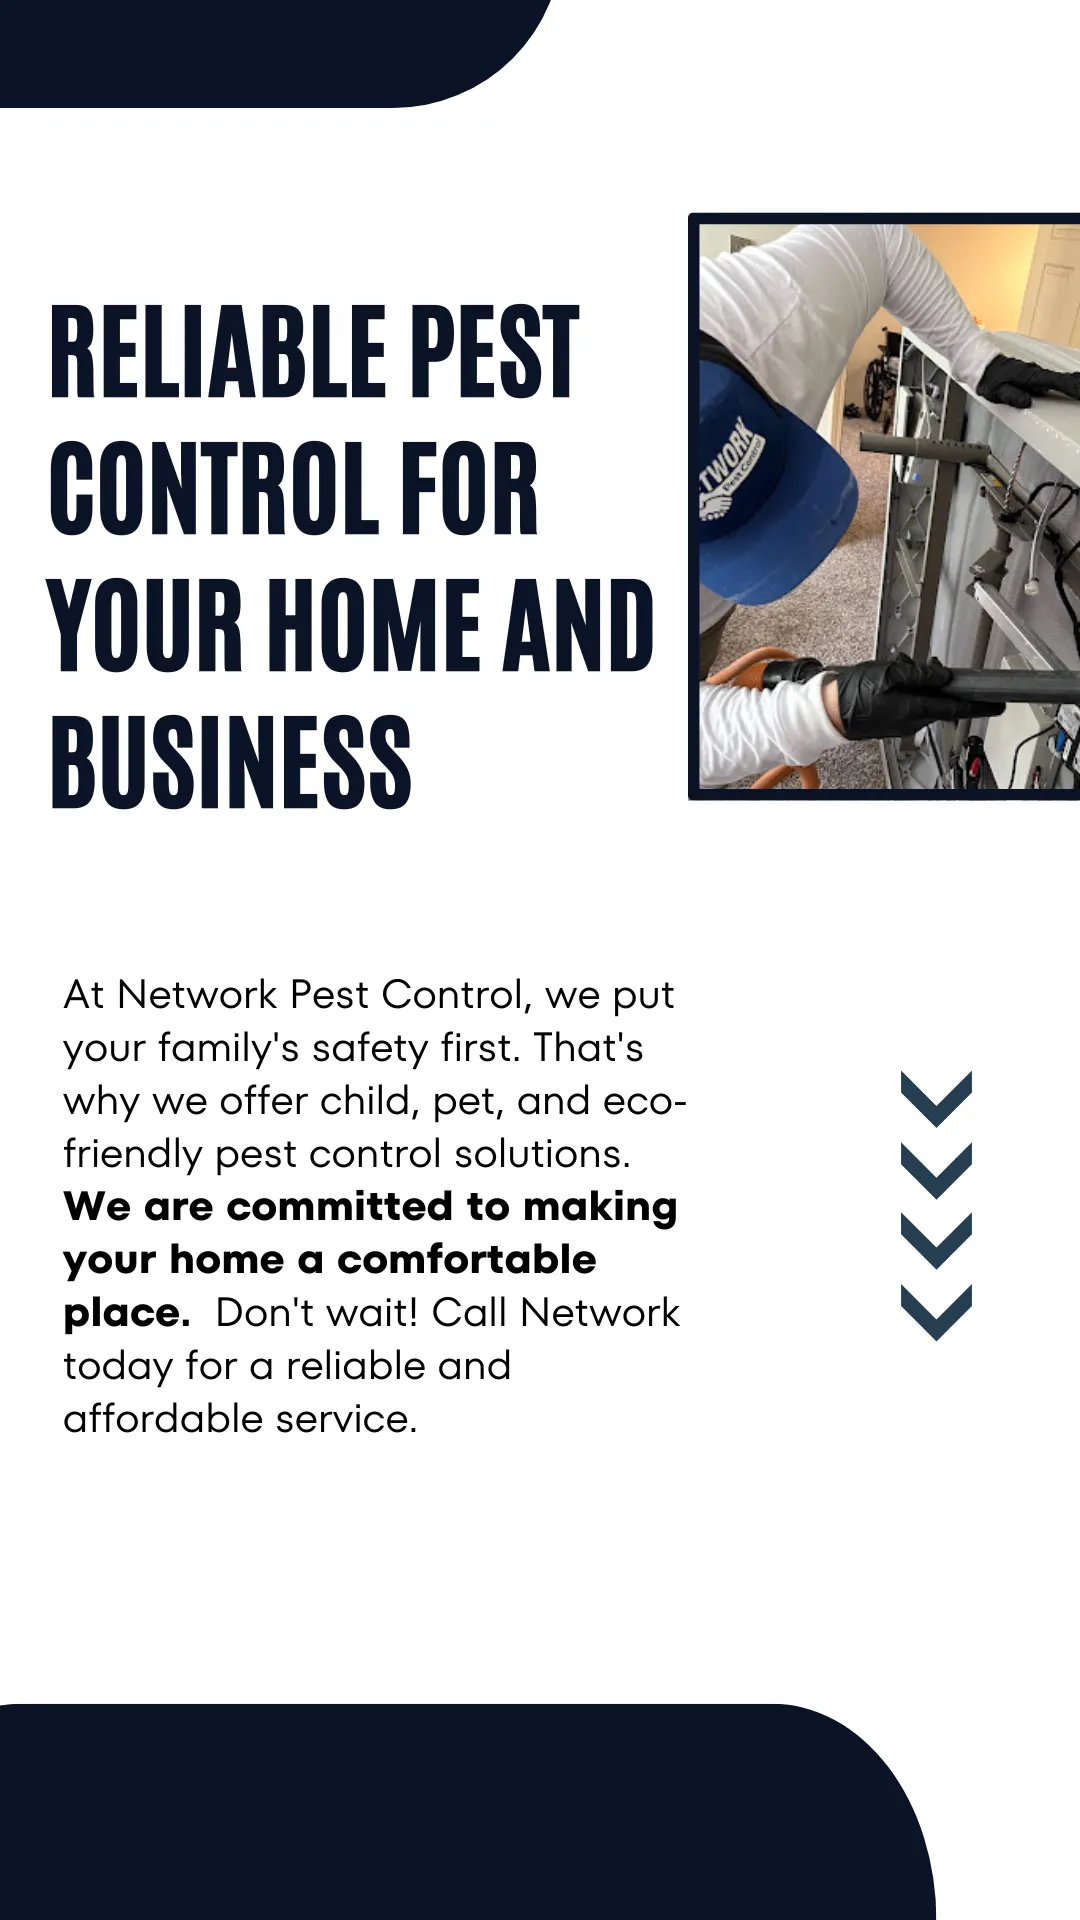 Mobile homepage image from network pest control with the owner Craig Broadhead doing pest control service with the information of the types of services that we offer as a reliable pest control company for your home and business